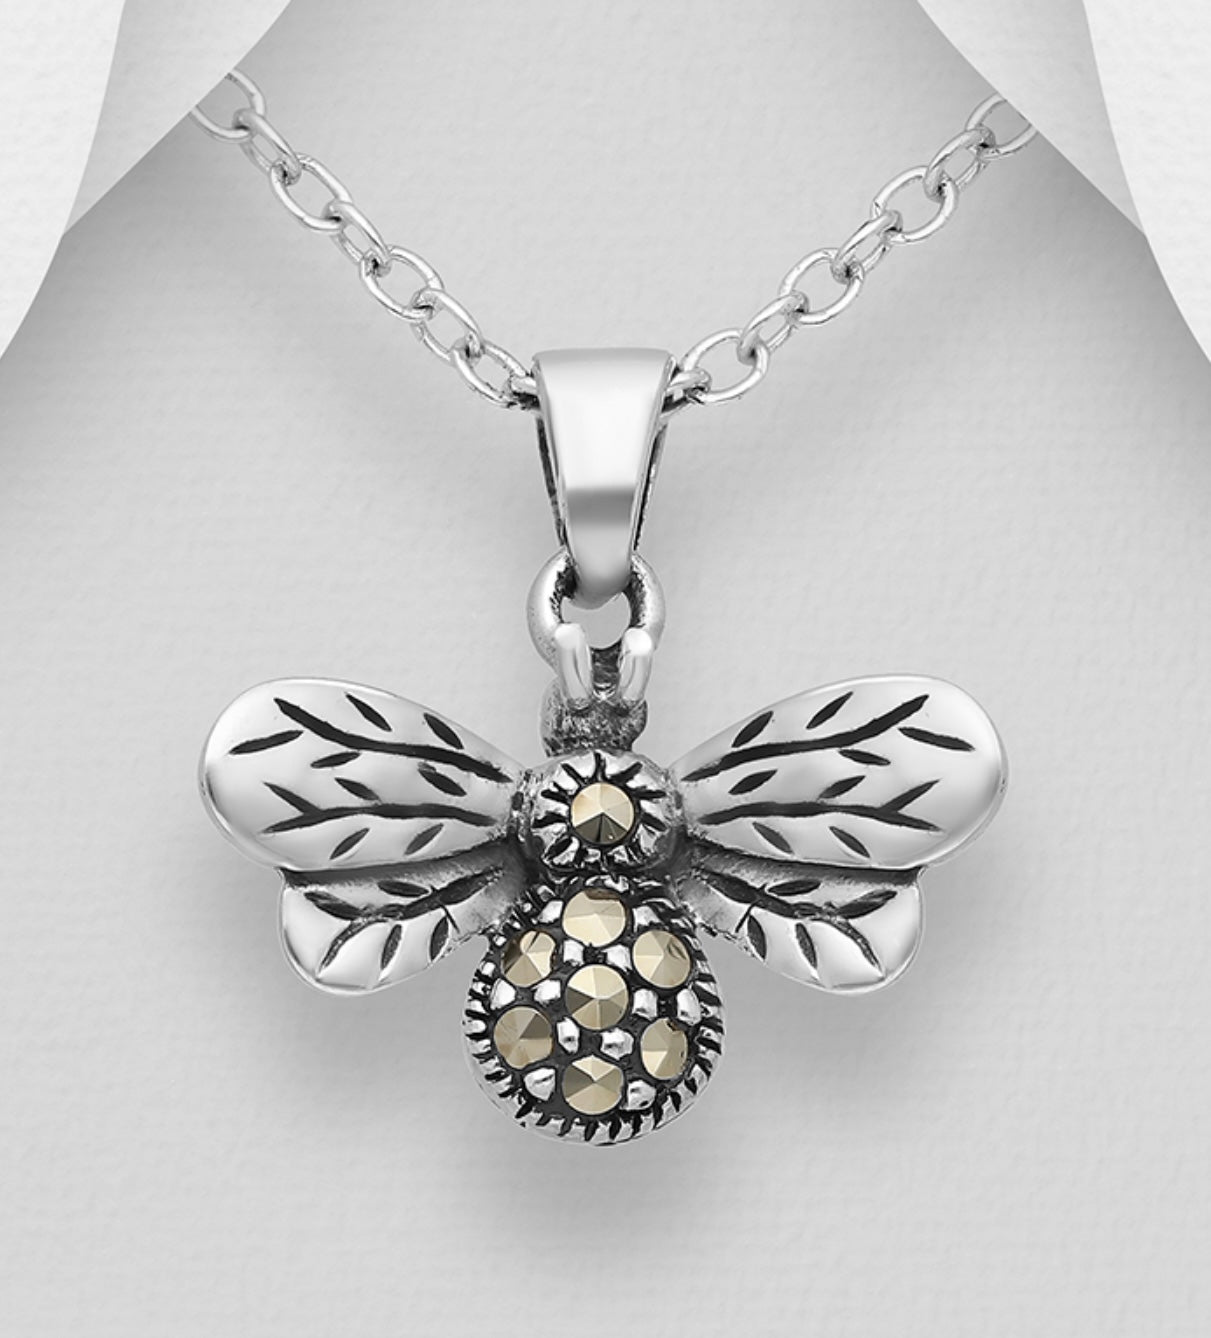 Sterling Silver BEE Pendant Necklace with Crystals